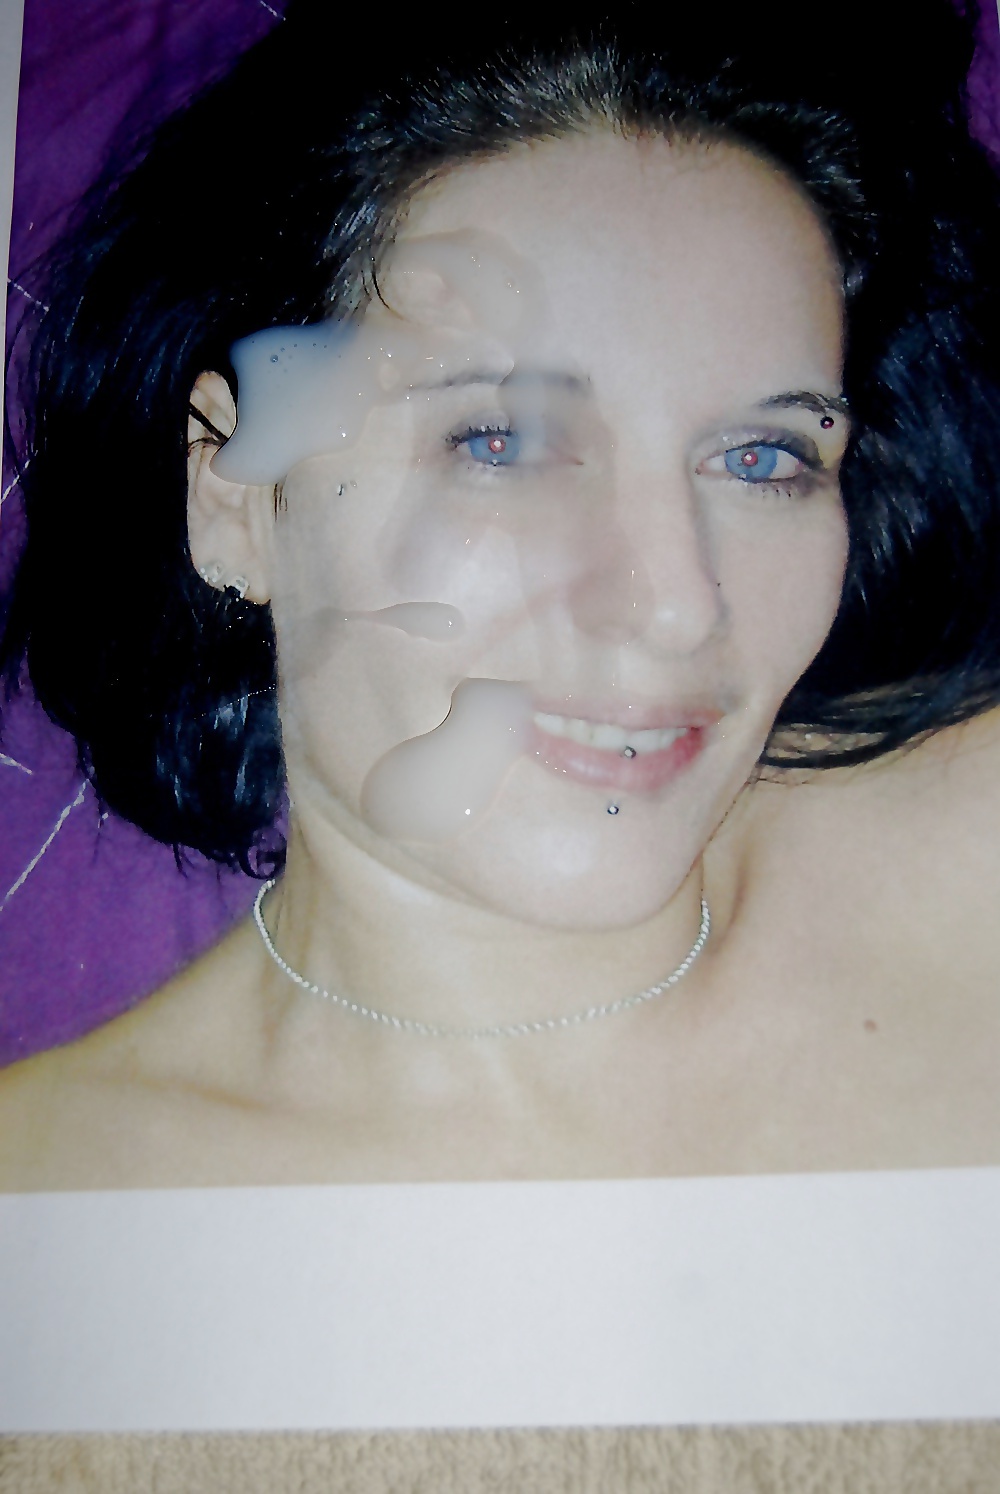 Tribute my friends adult photos